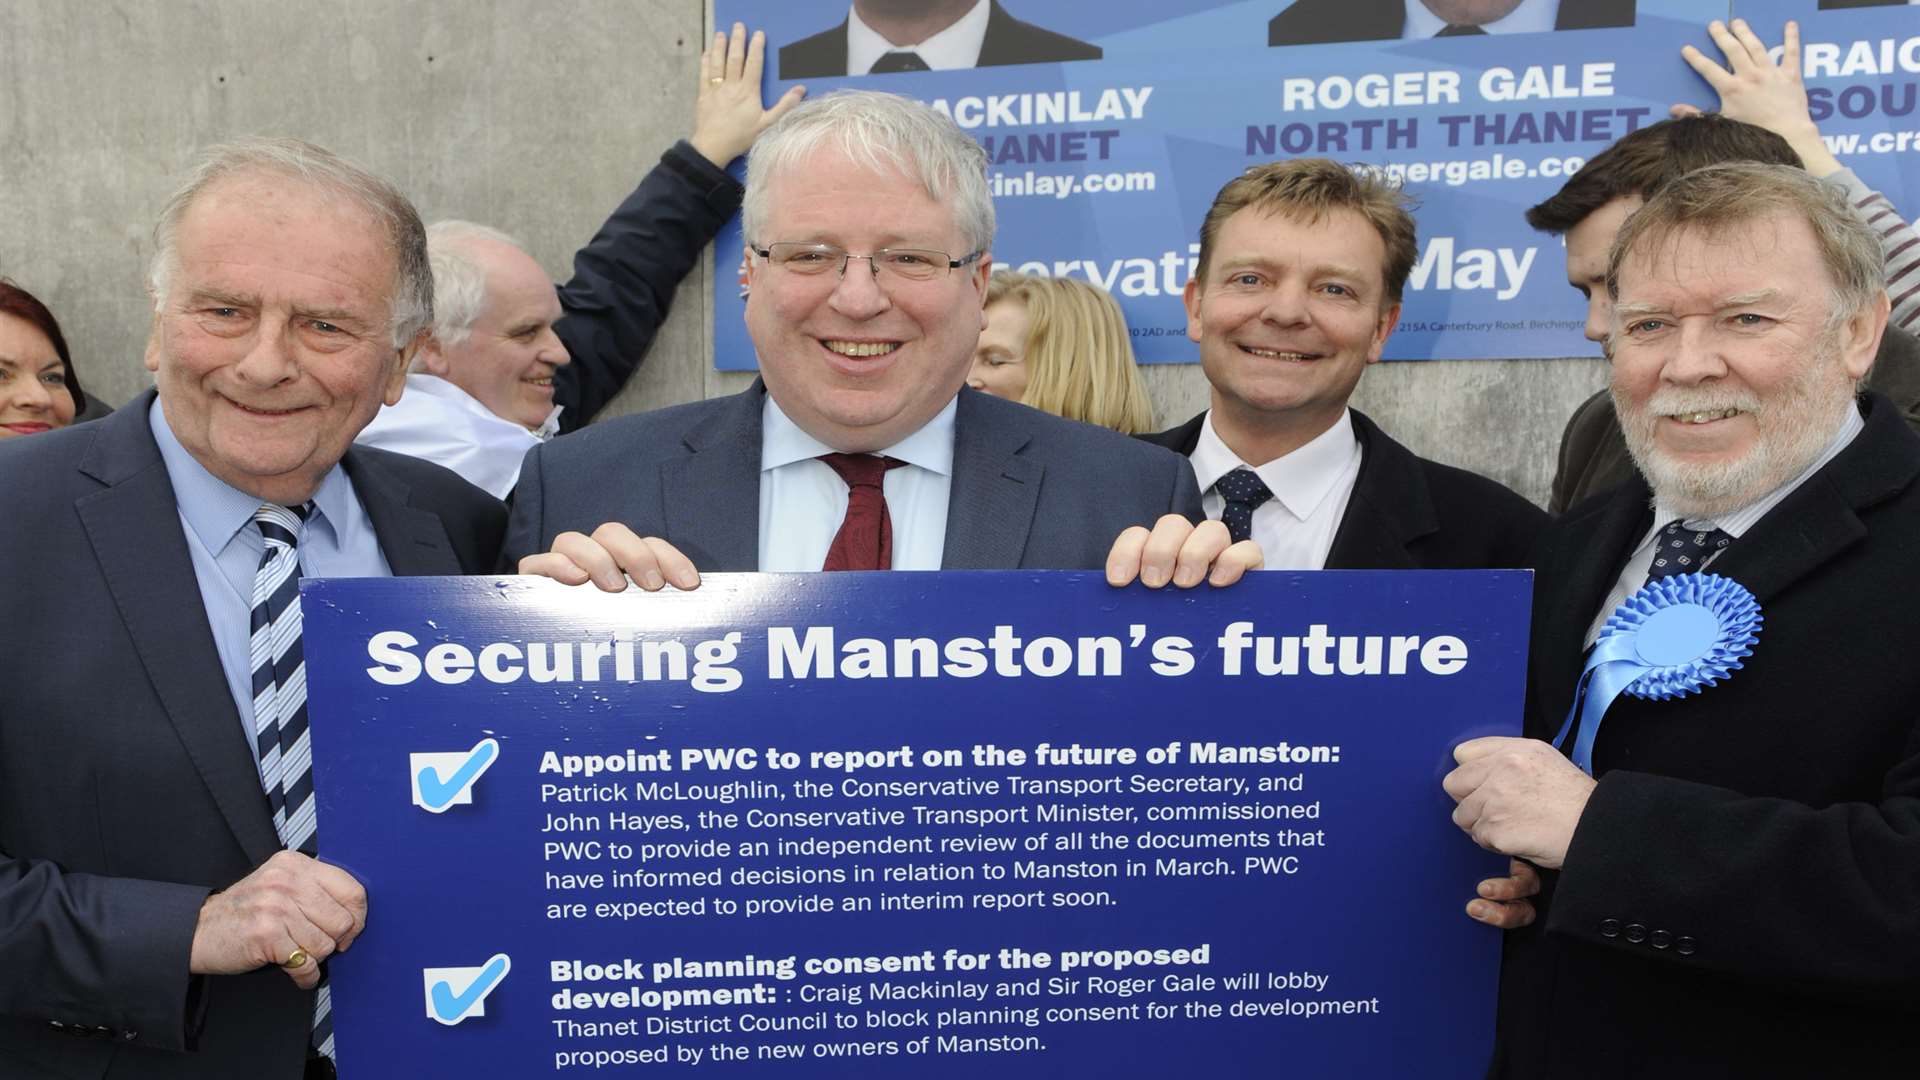 North Thanet candidate Sir Roger Gale, transport secretary Patrick McLoughlin, South Thanet candidate Craig Mackinlay and leader of Thanet Conservatives Bob Bayford